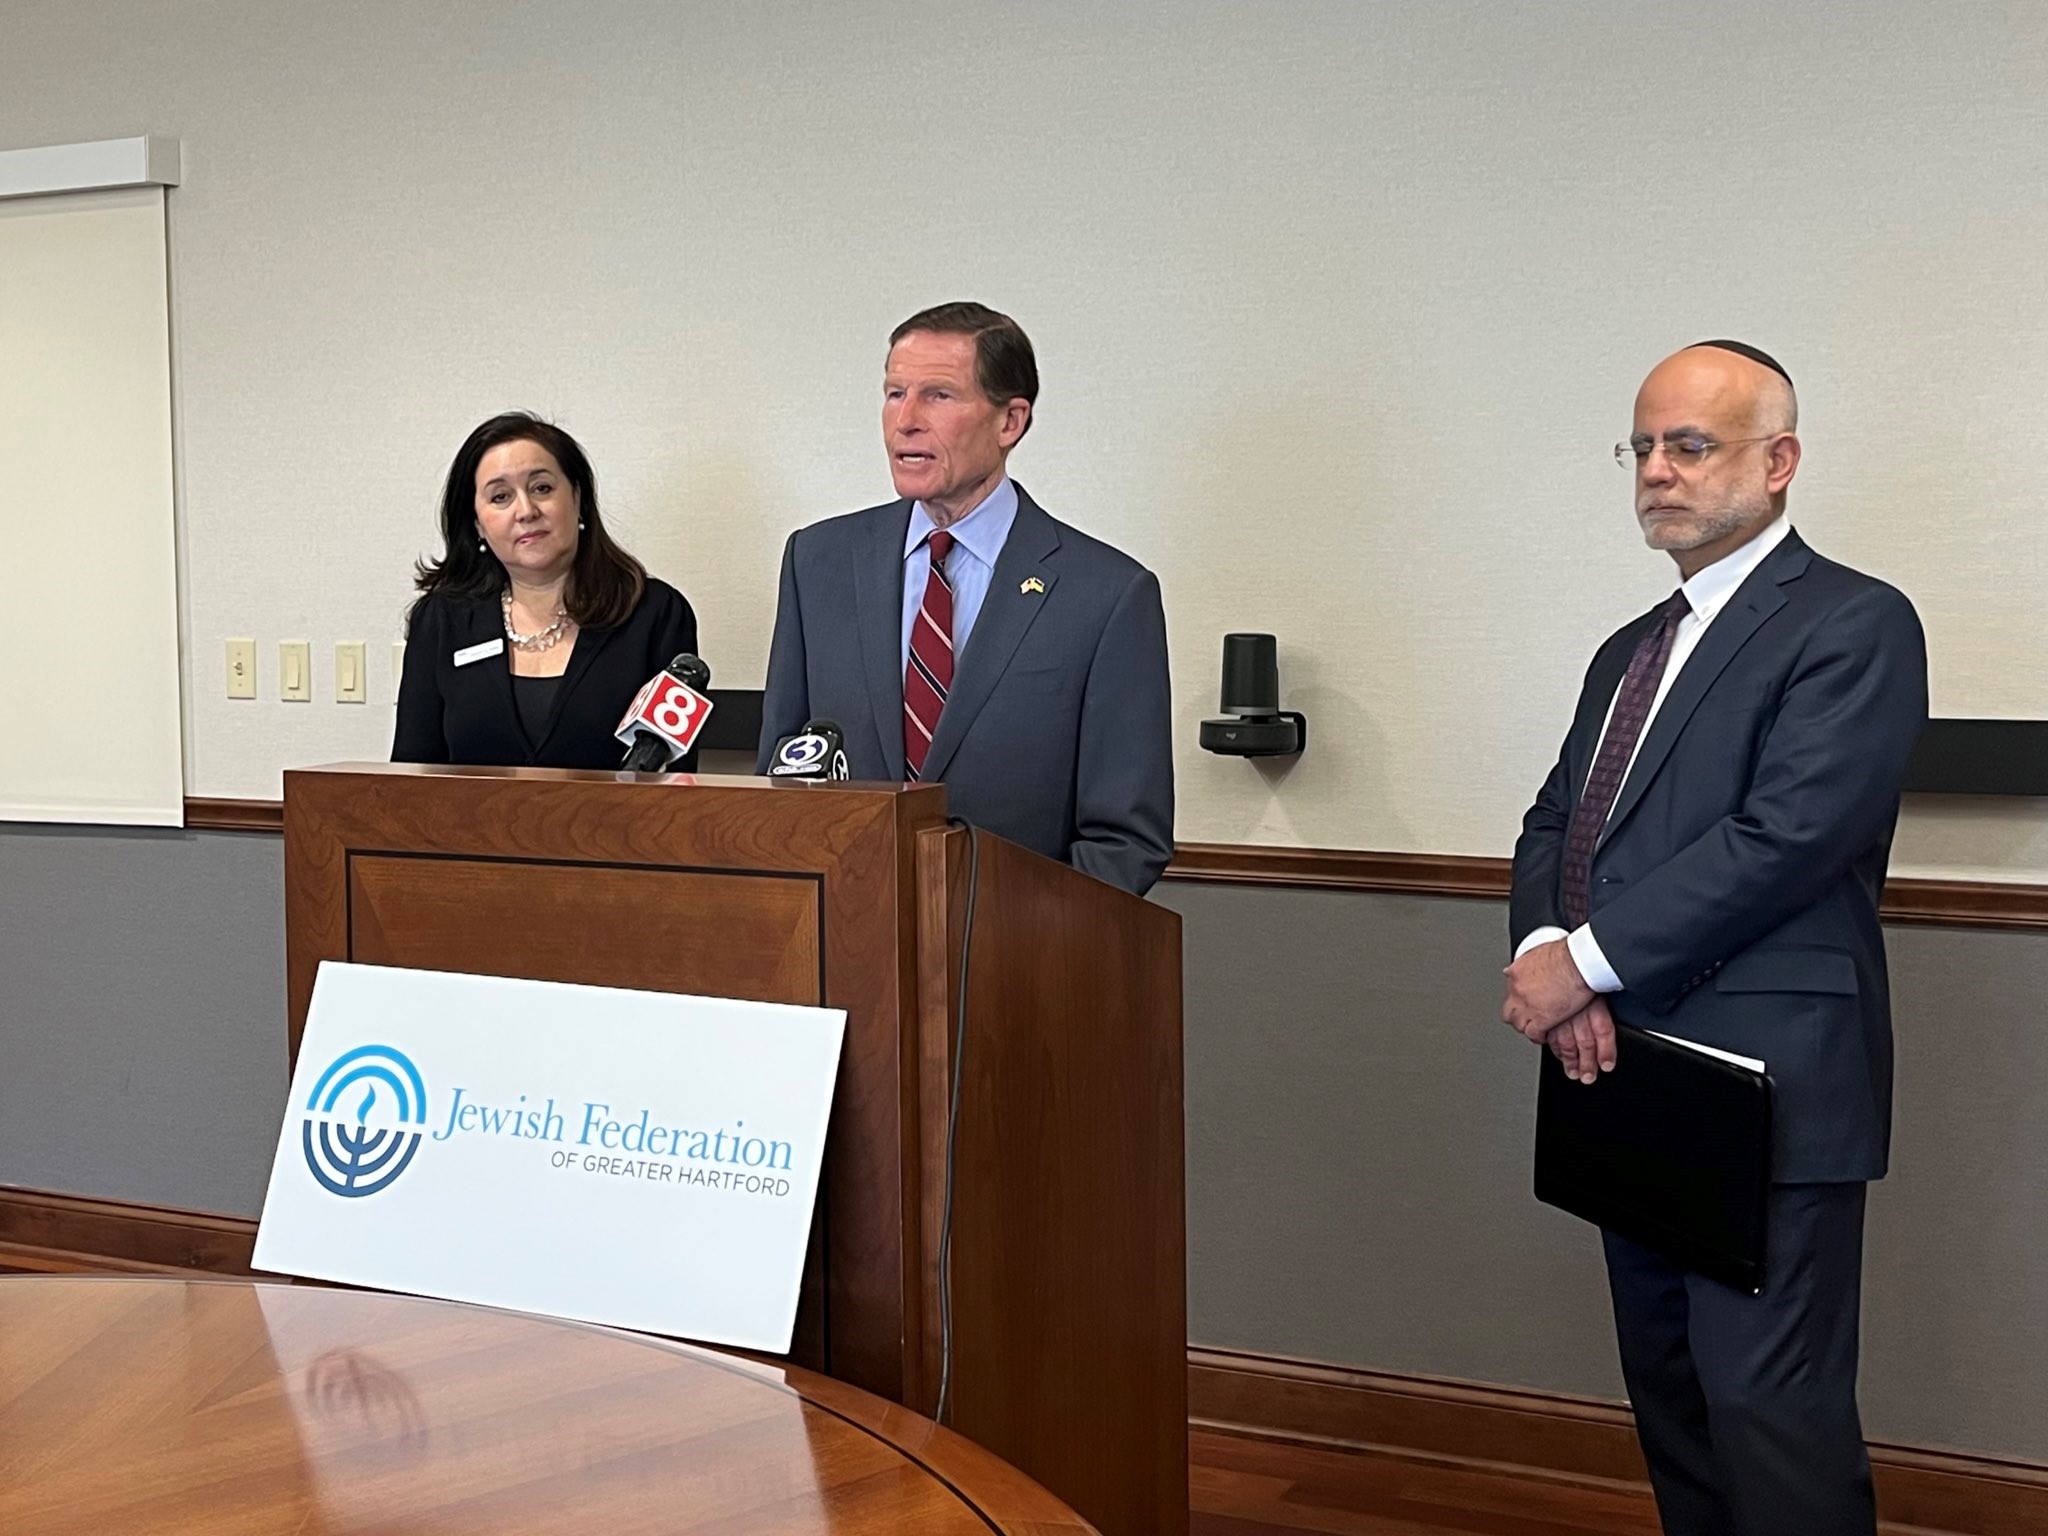 U.S. Senator Richard Blumenthal (D-CT) joined the Anti-Defamation League and Jewish Federation of Greater Hartford to stand up to hate after a report revealed an alarming 100 percent increase in antisemitic incidents in Connecticut. 